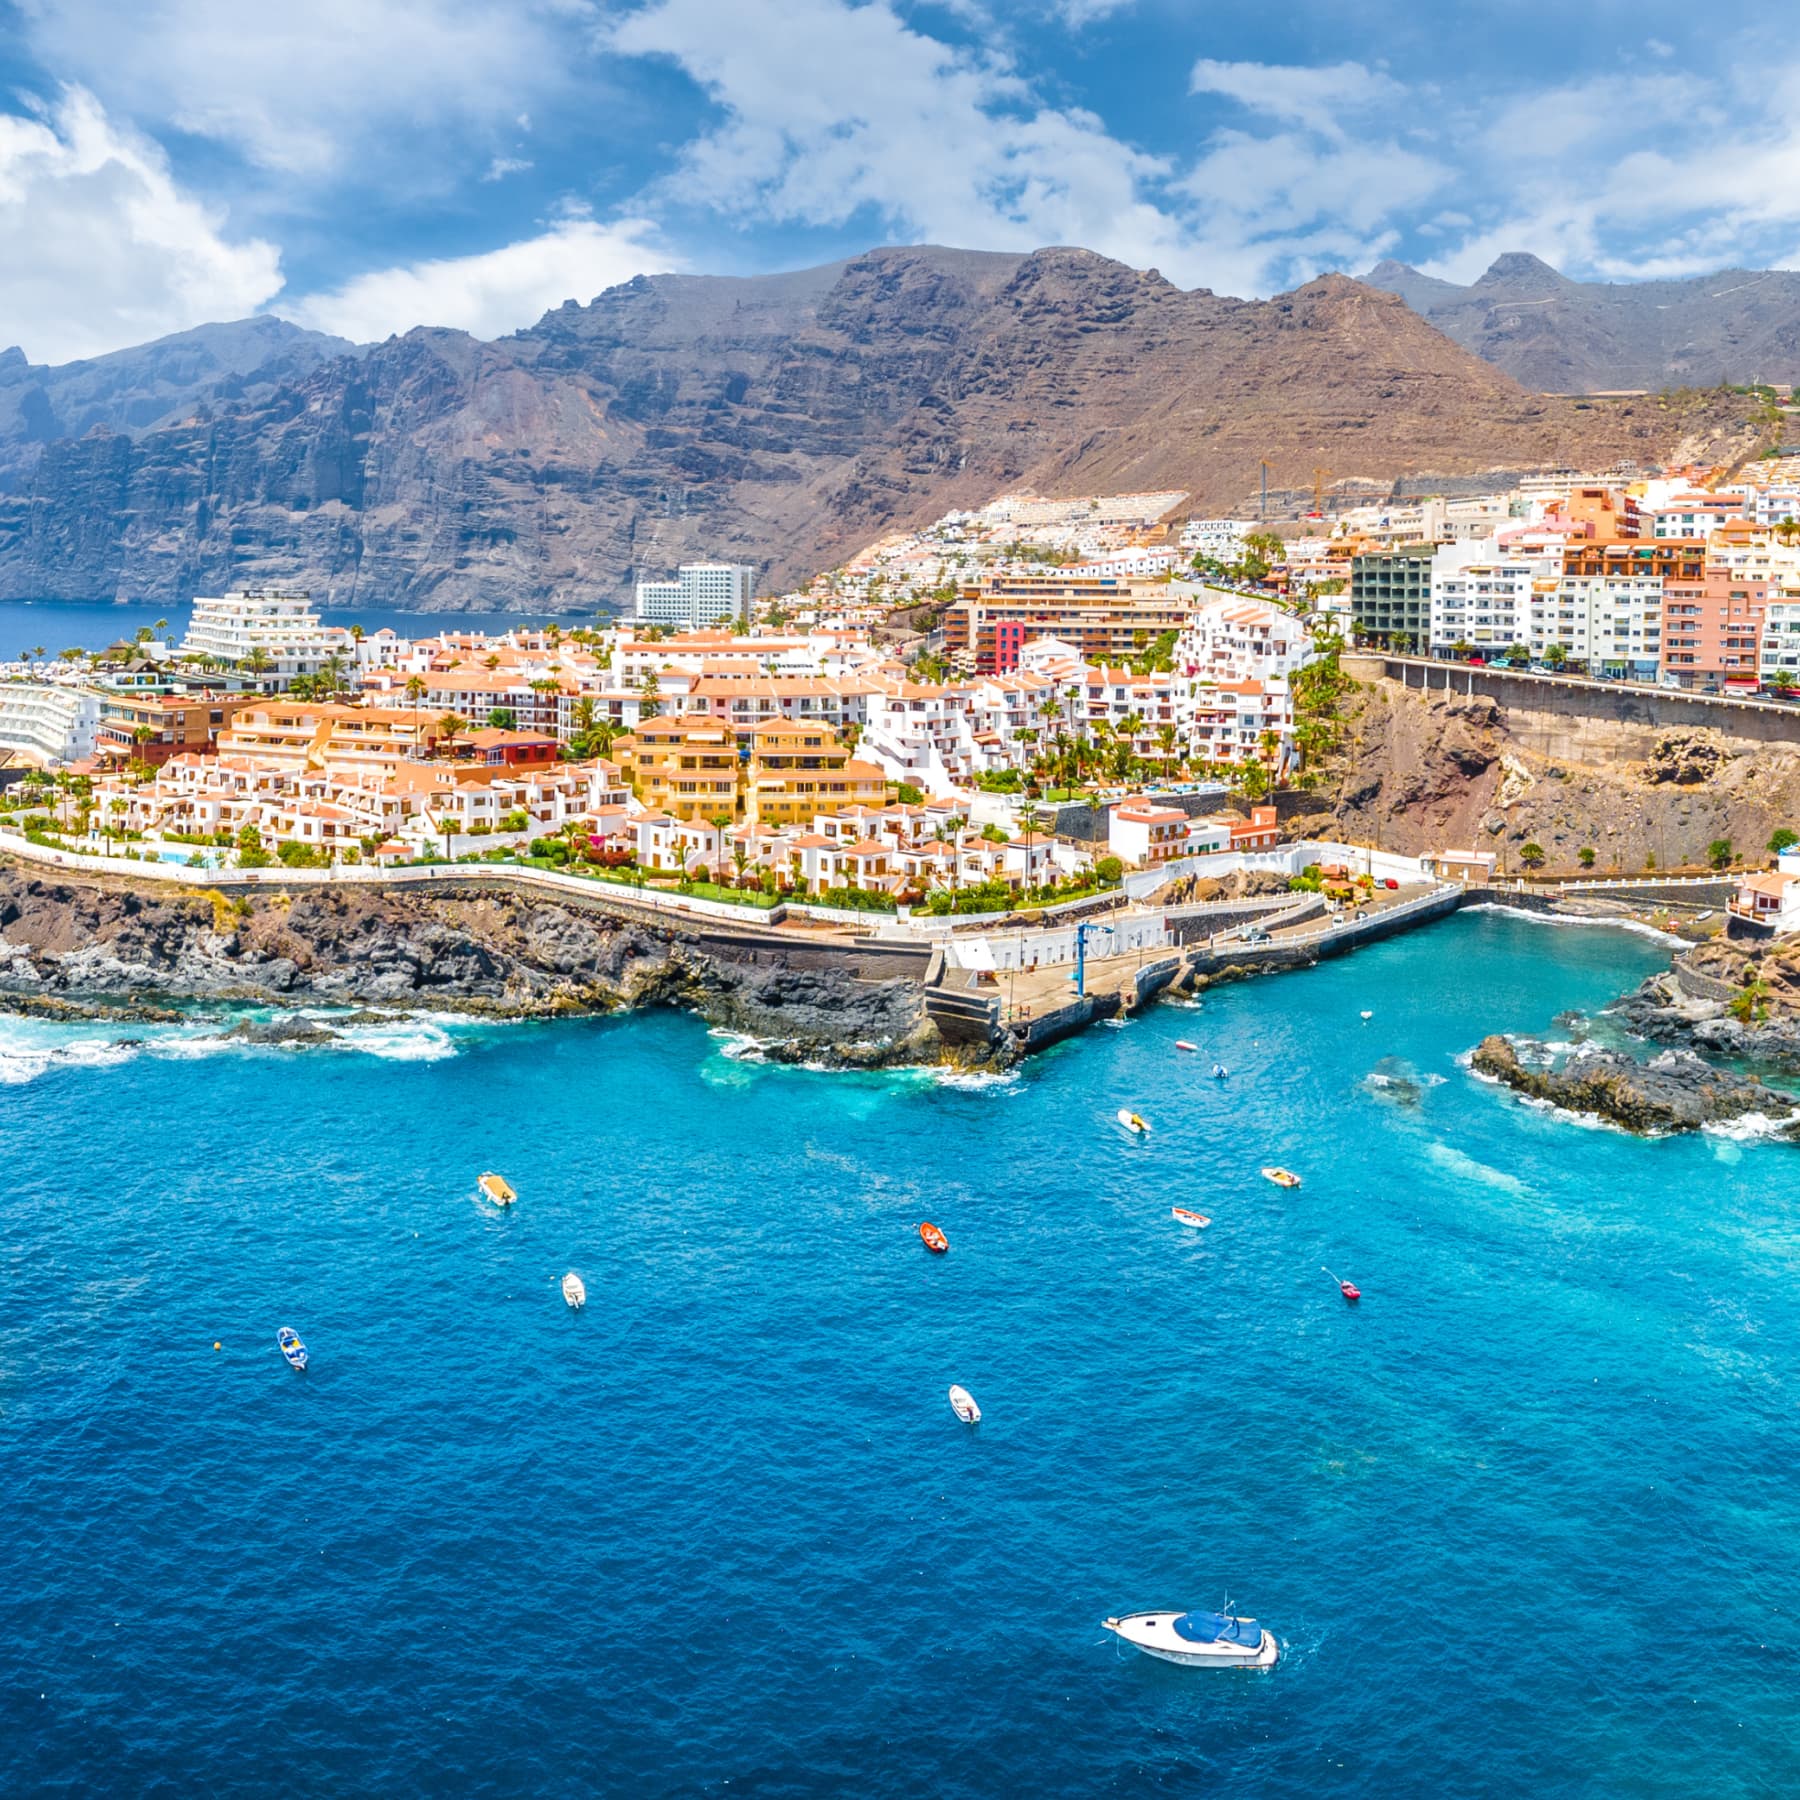 The Canaries and in particular the island of Tenerife is ideal for half term breaks